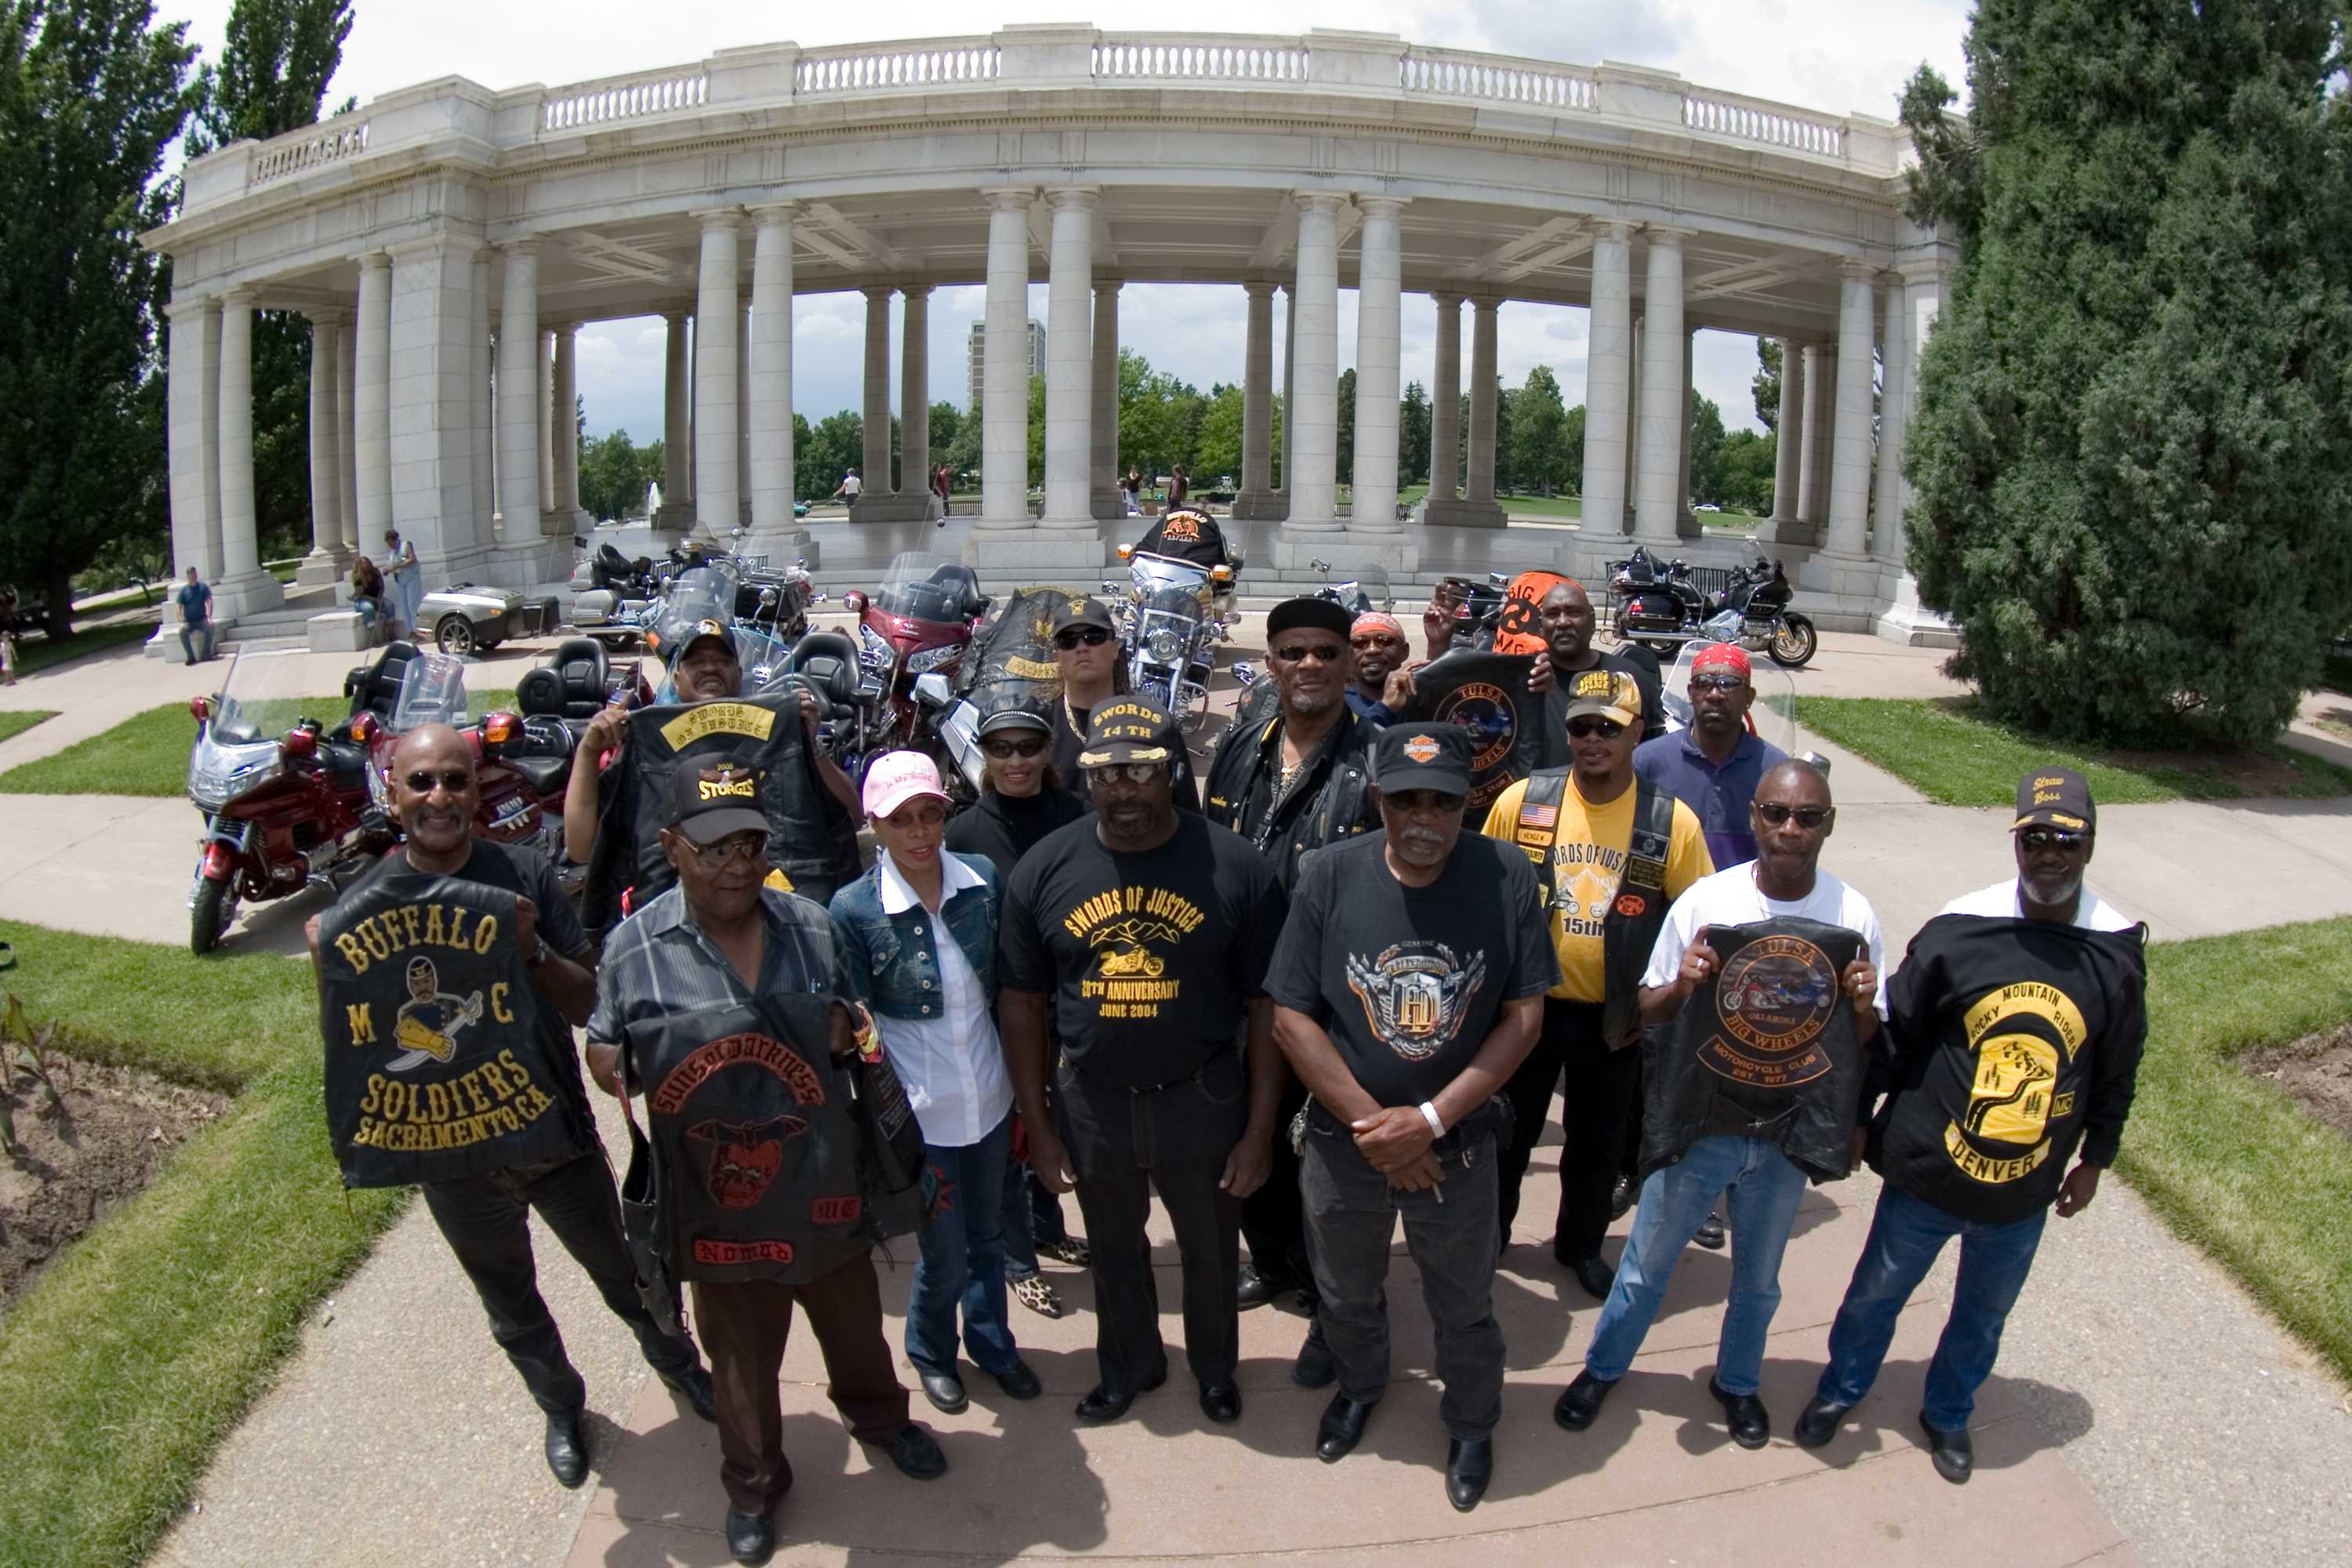 How do you find a list of biker clubs in your area?